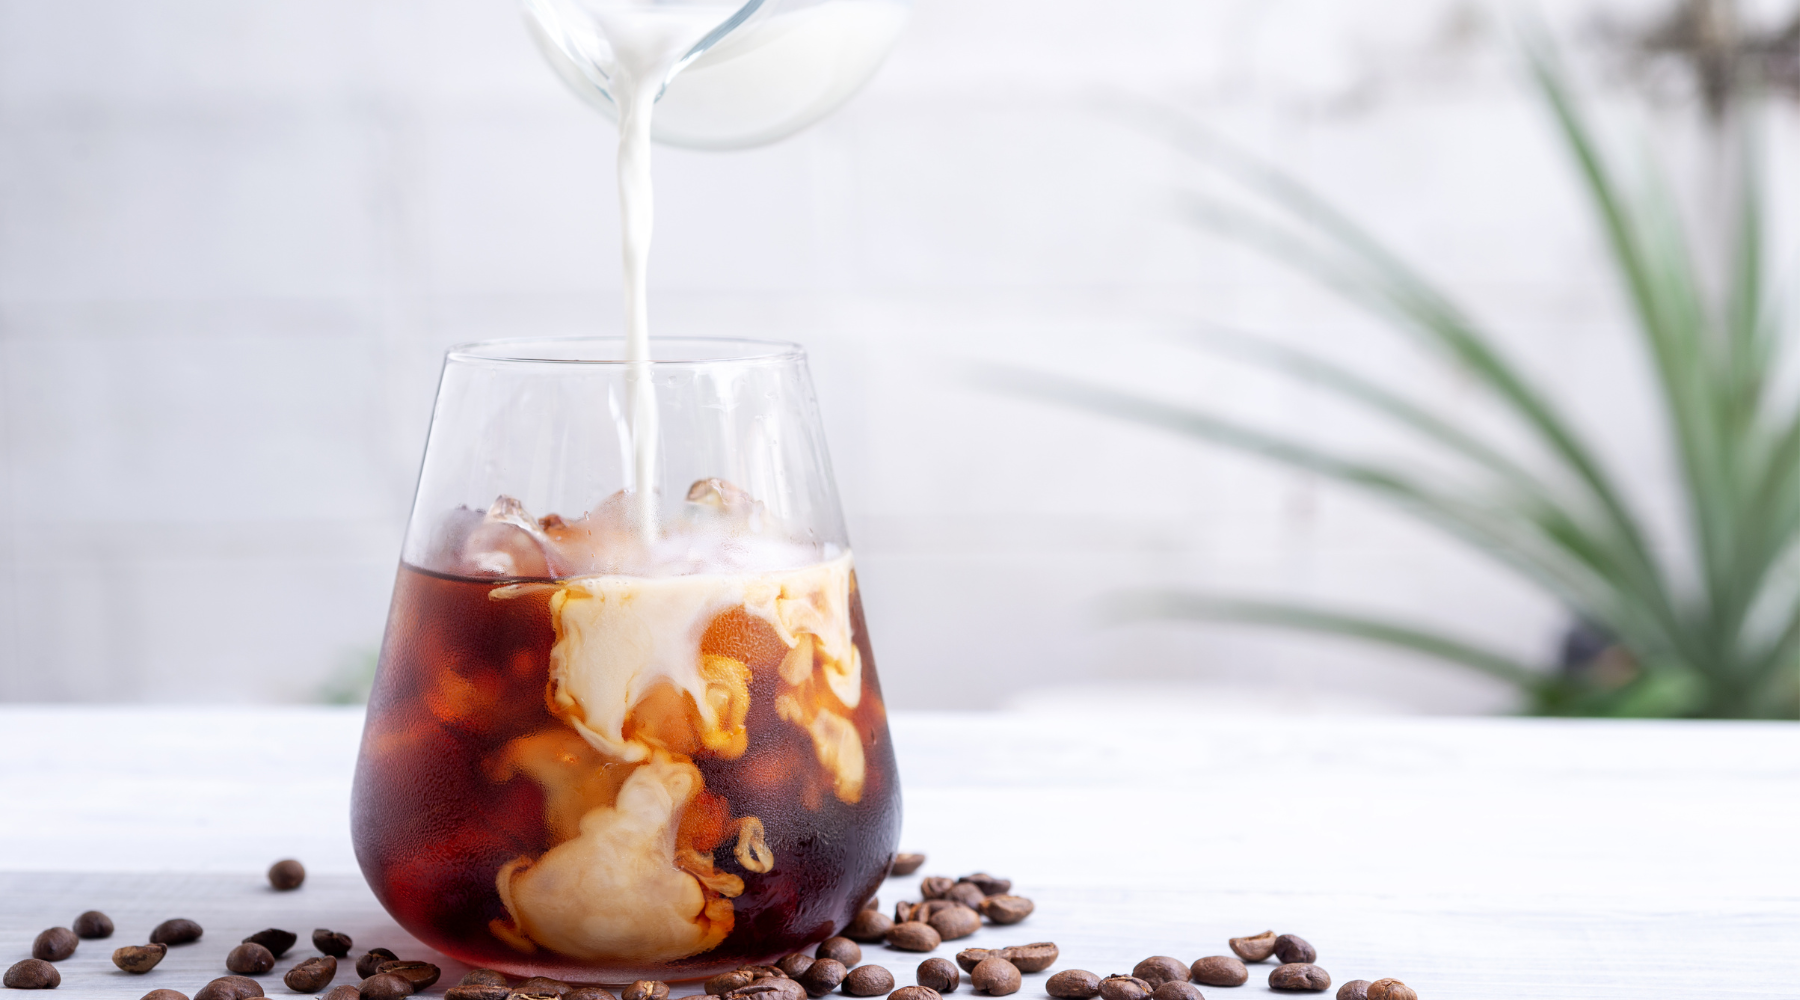 Cold Brew vs Iced Coffee: Key Differences and Similarities